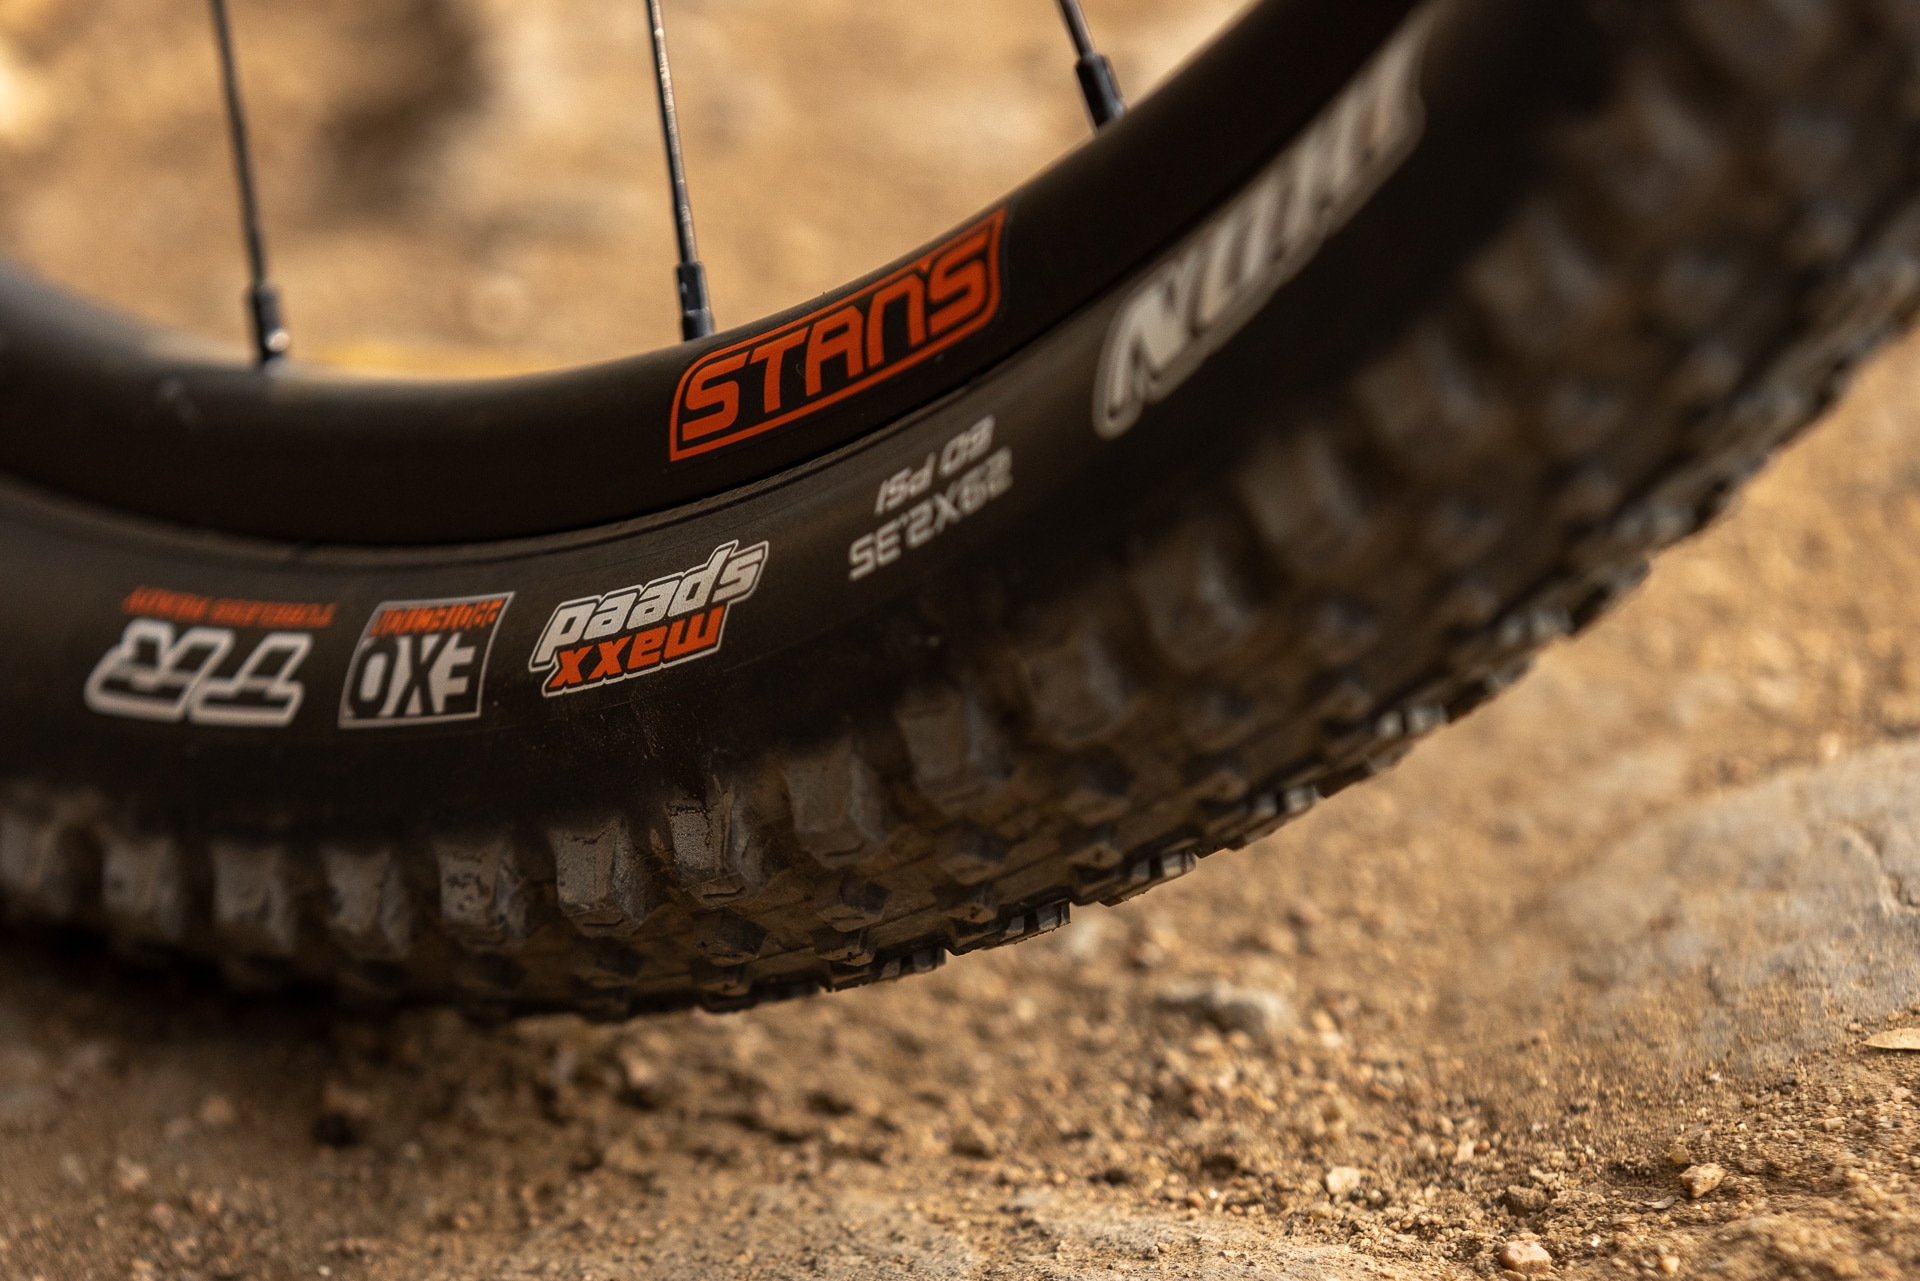 Maxxis new Maxxspeed rubber compound is fast and offers great traction